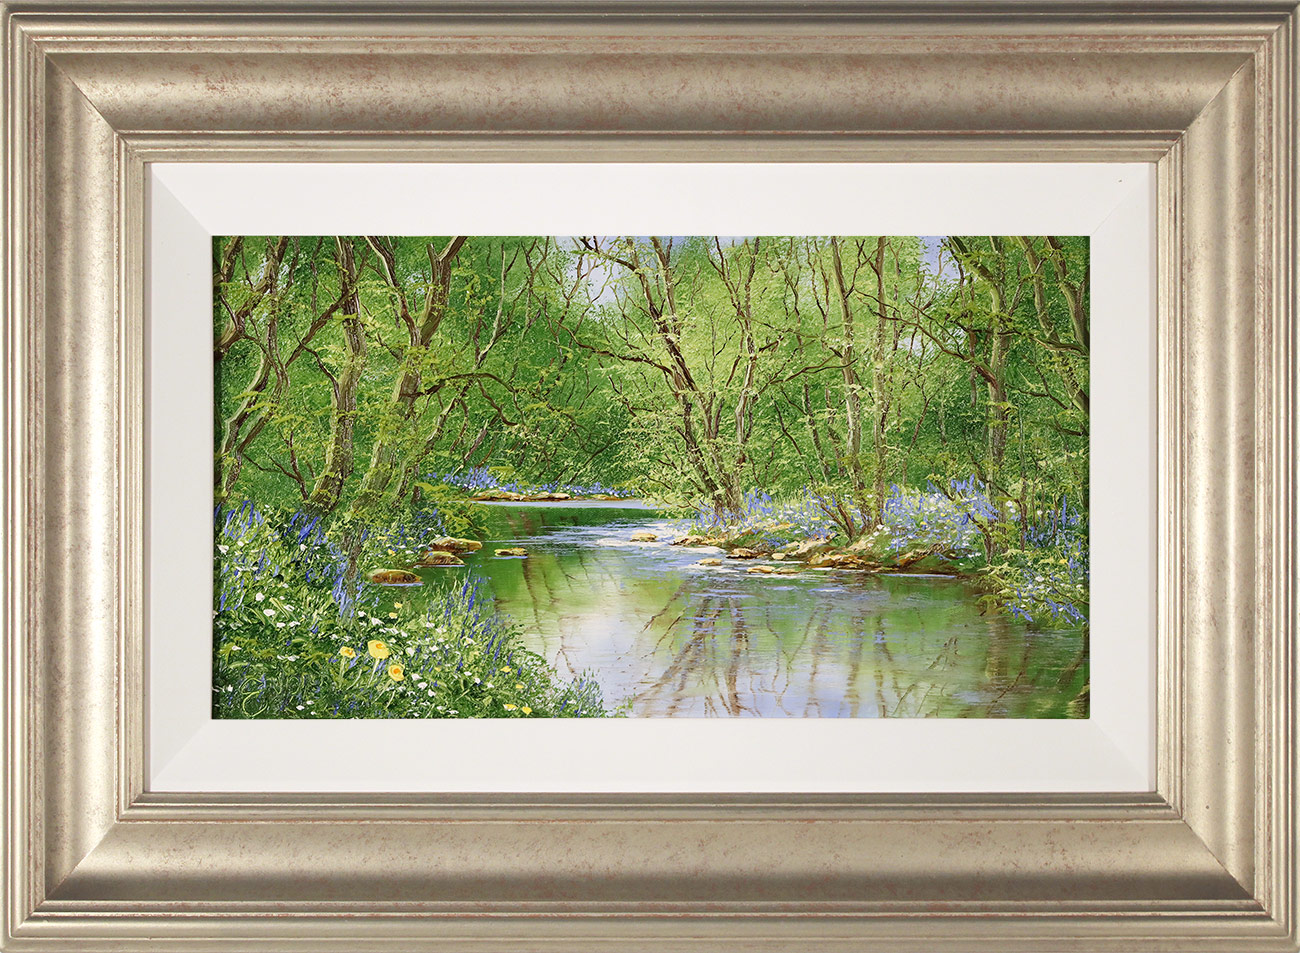 Terry Evans, Original oil painting on canvas, The Bluebell Wood Click to enlarge